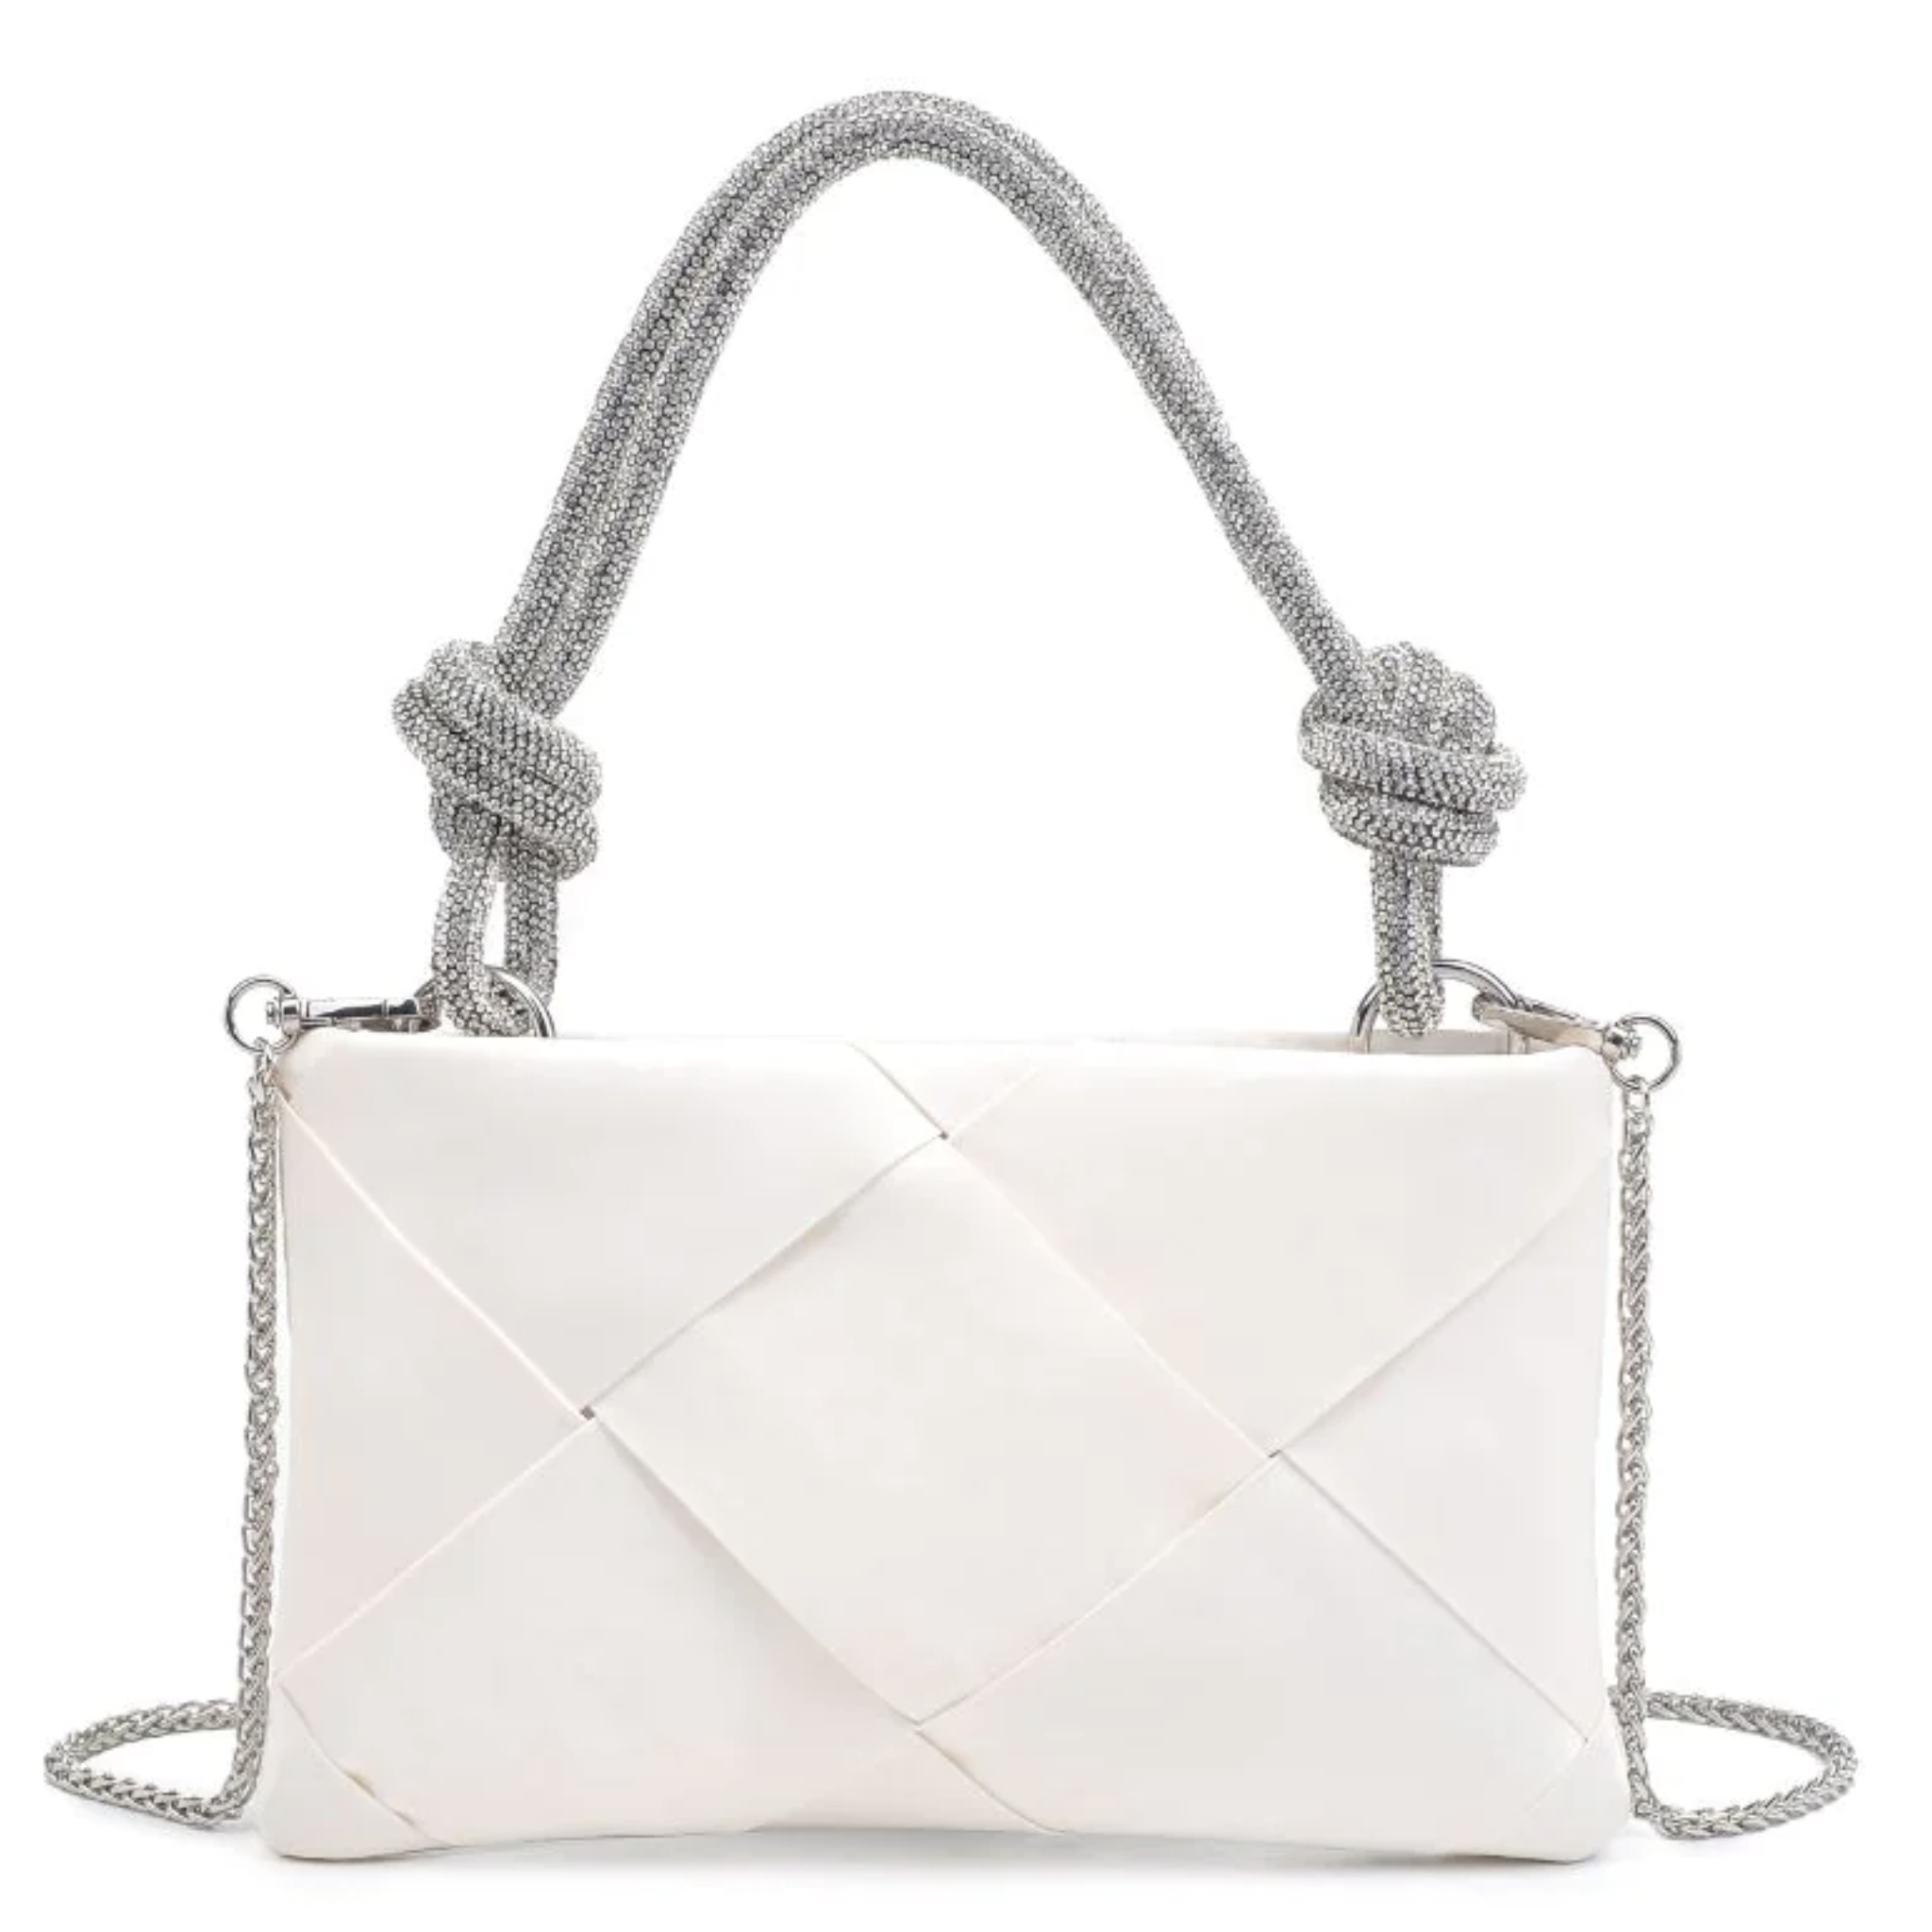 Urban-Expressions-Valkyrie-Evening-Bag-White